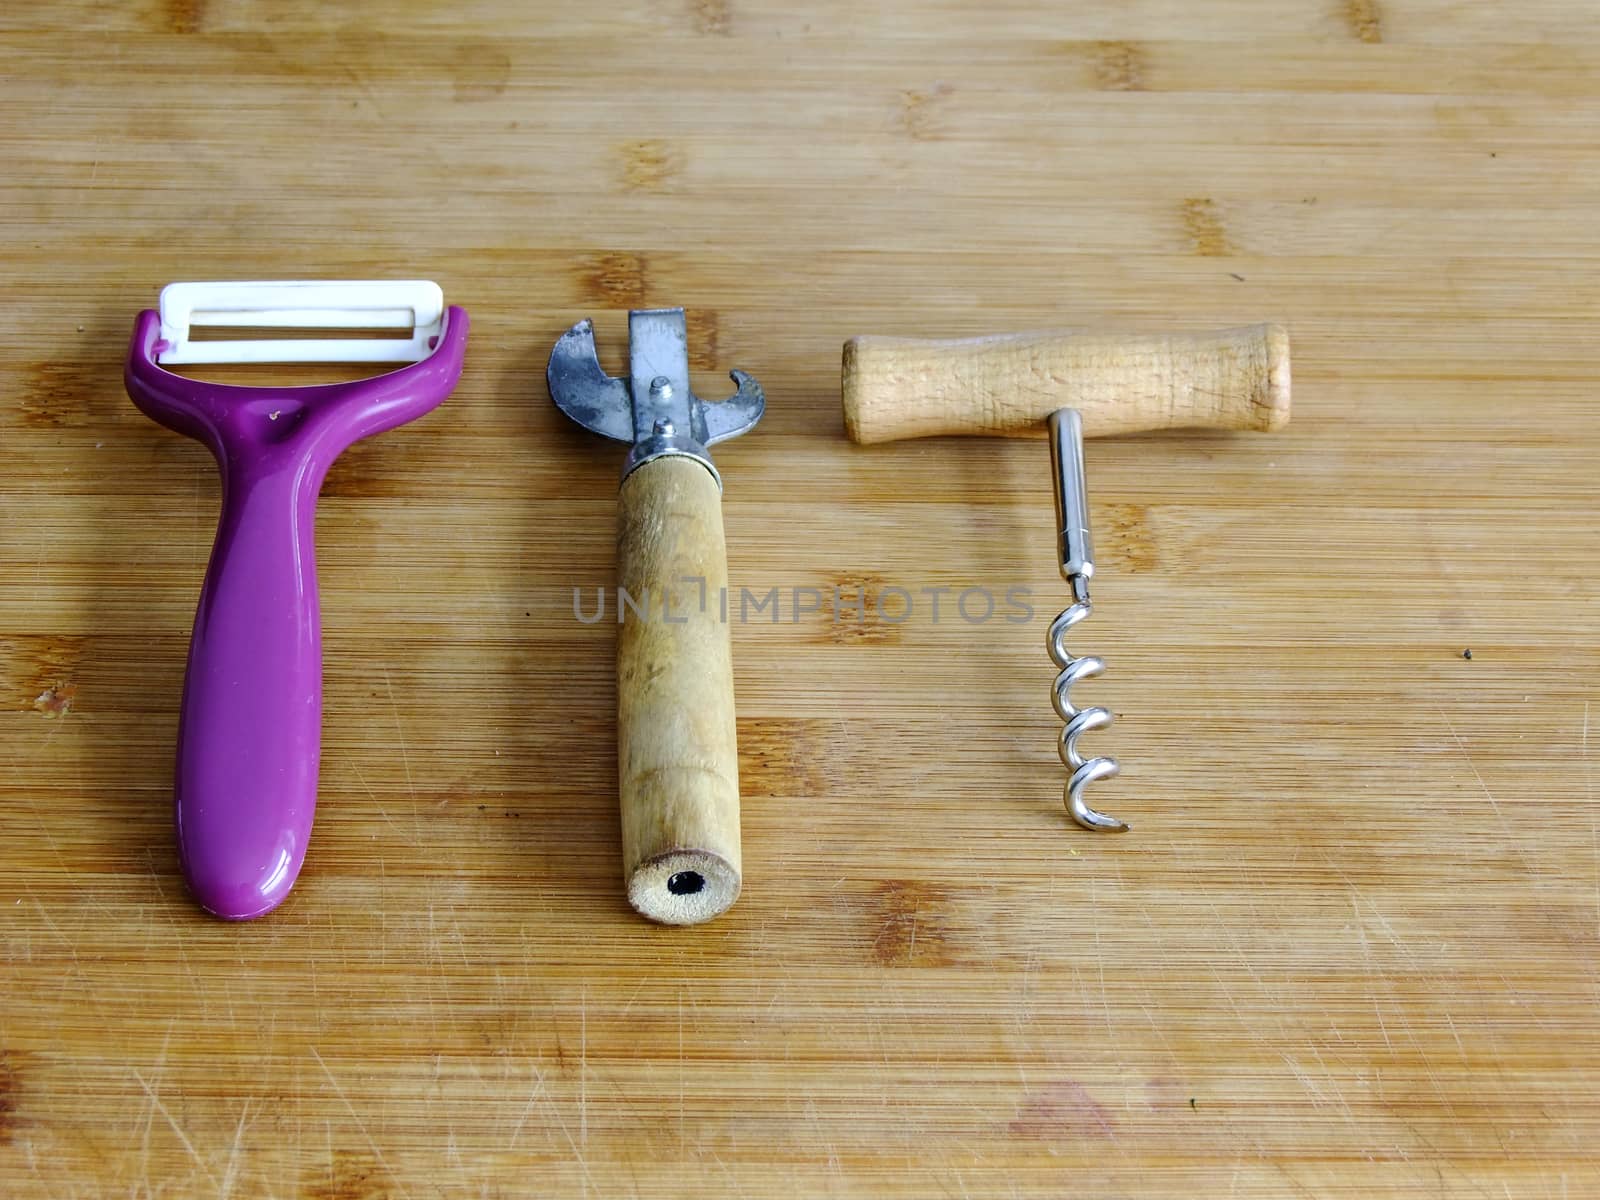 Potato Peeler, Can Opener and Bottle Opener on left Side of wooden Cutting Board